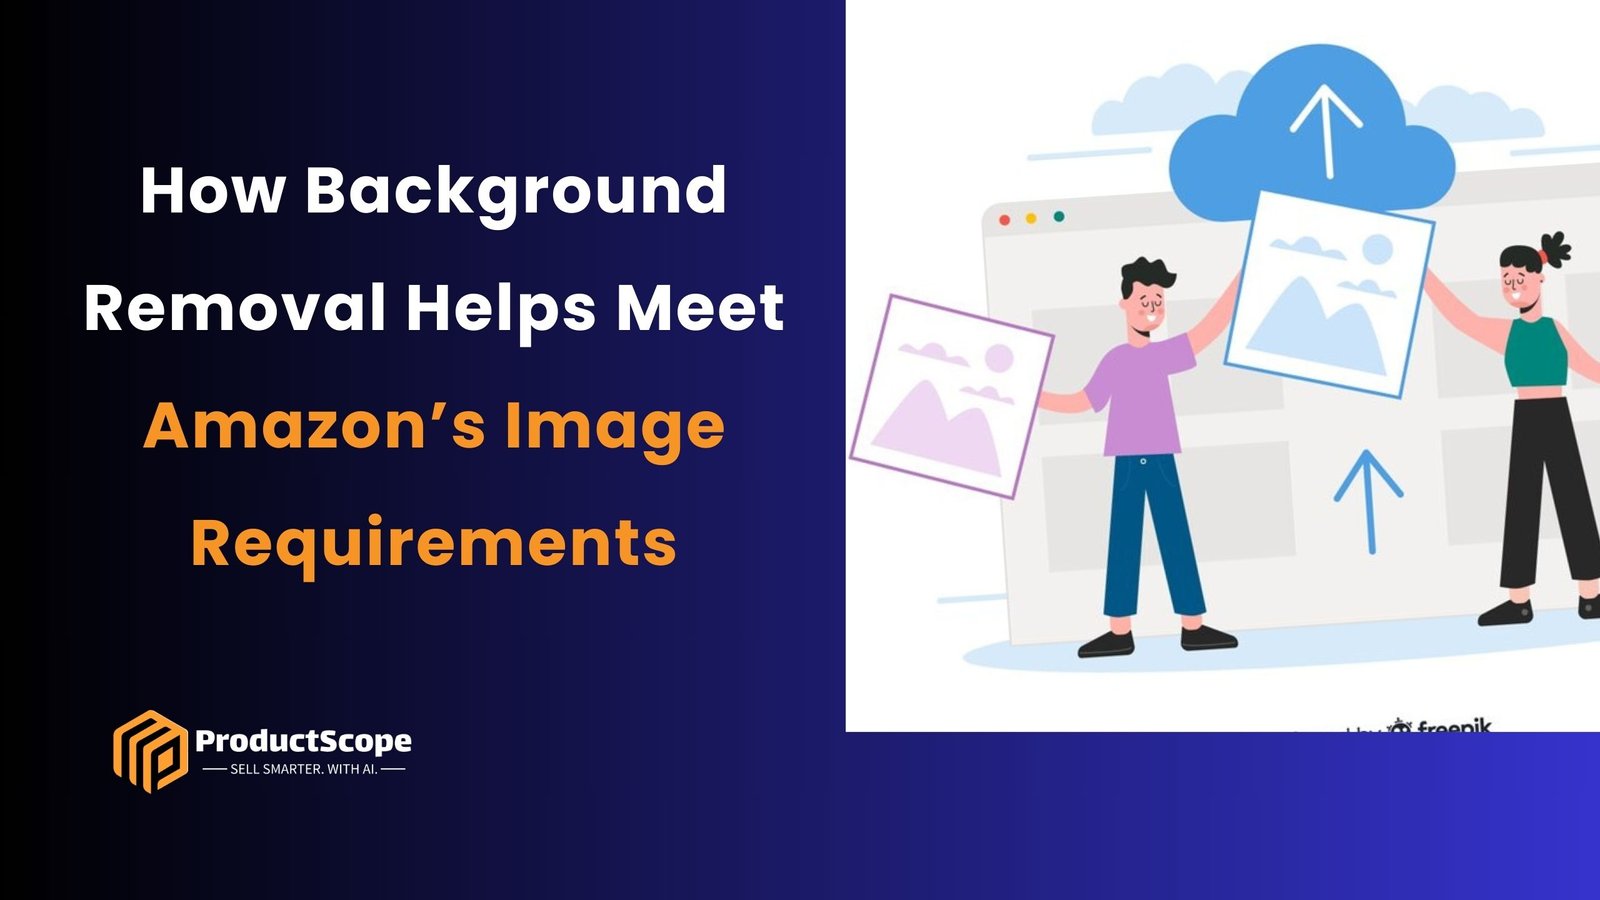 How Background Removal Helps Meet Amazon’s Image Requirements